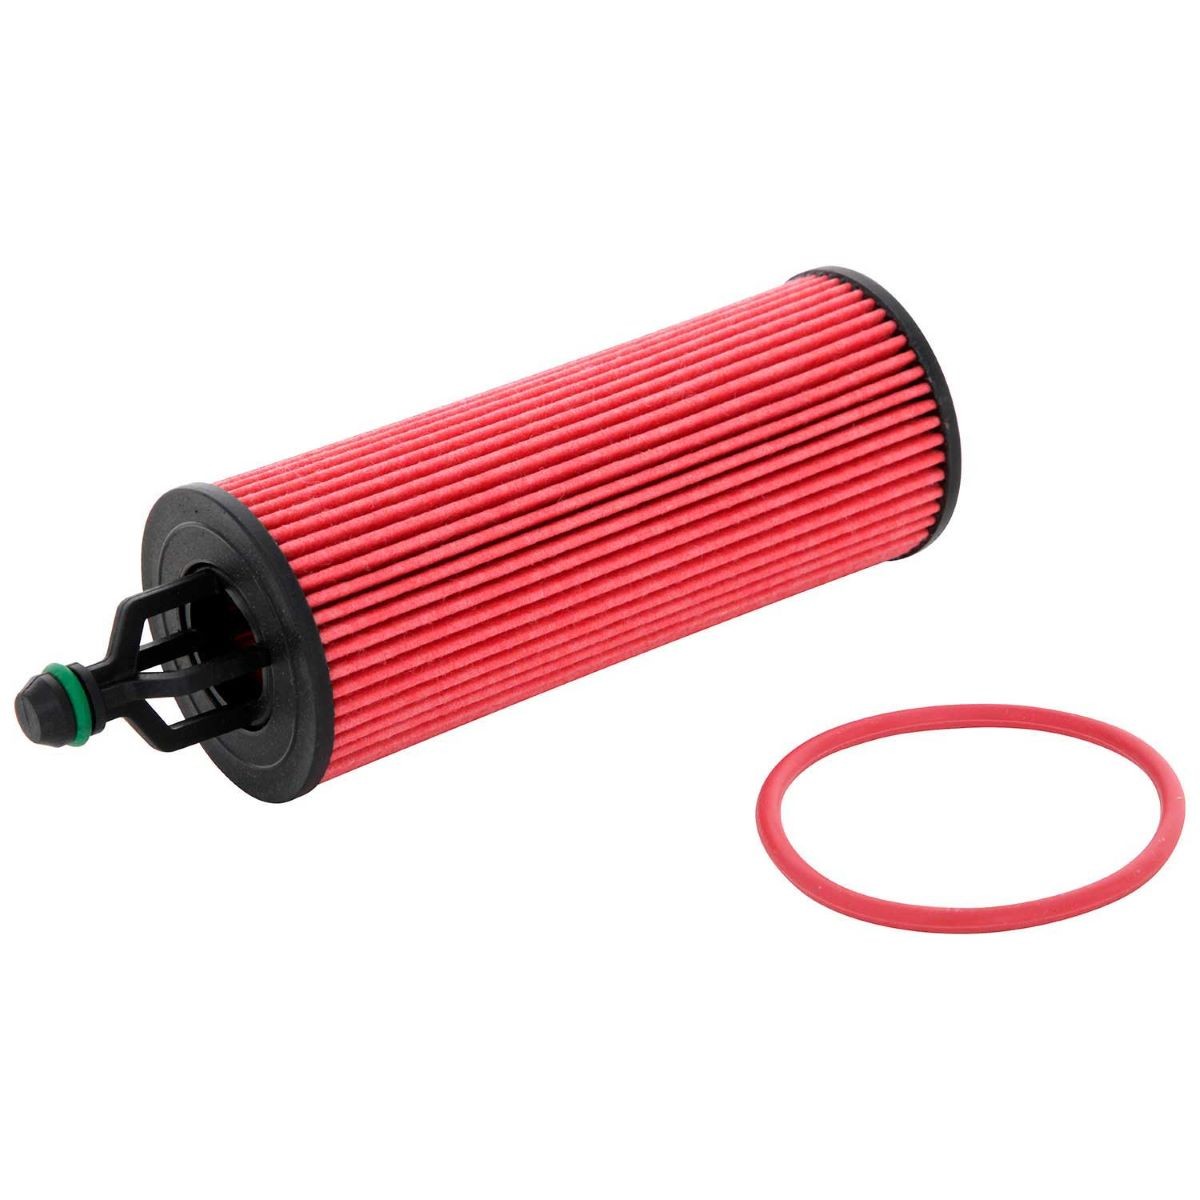 K&N Filters HP-7026 Oil filter DODGE experience and price